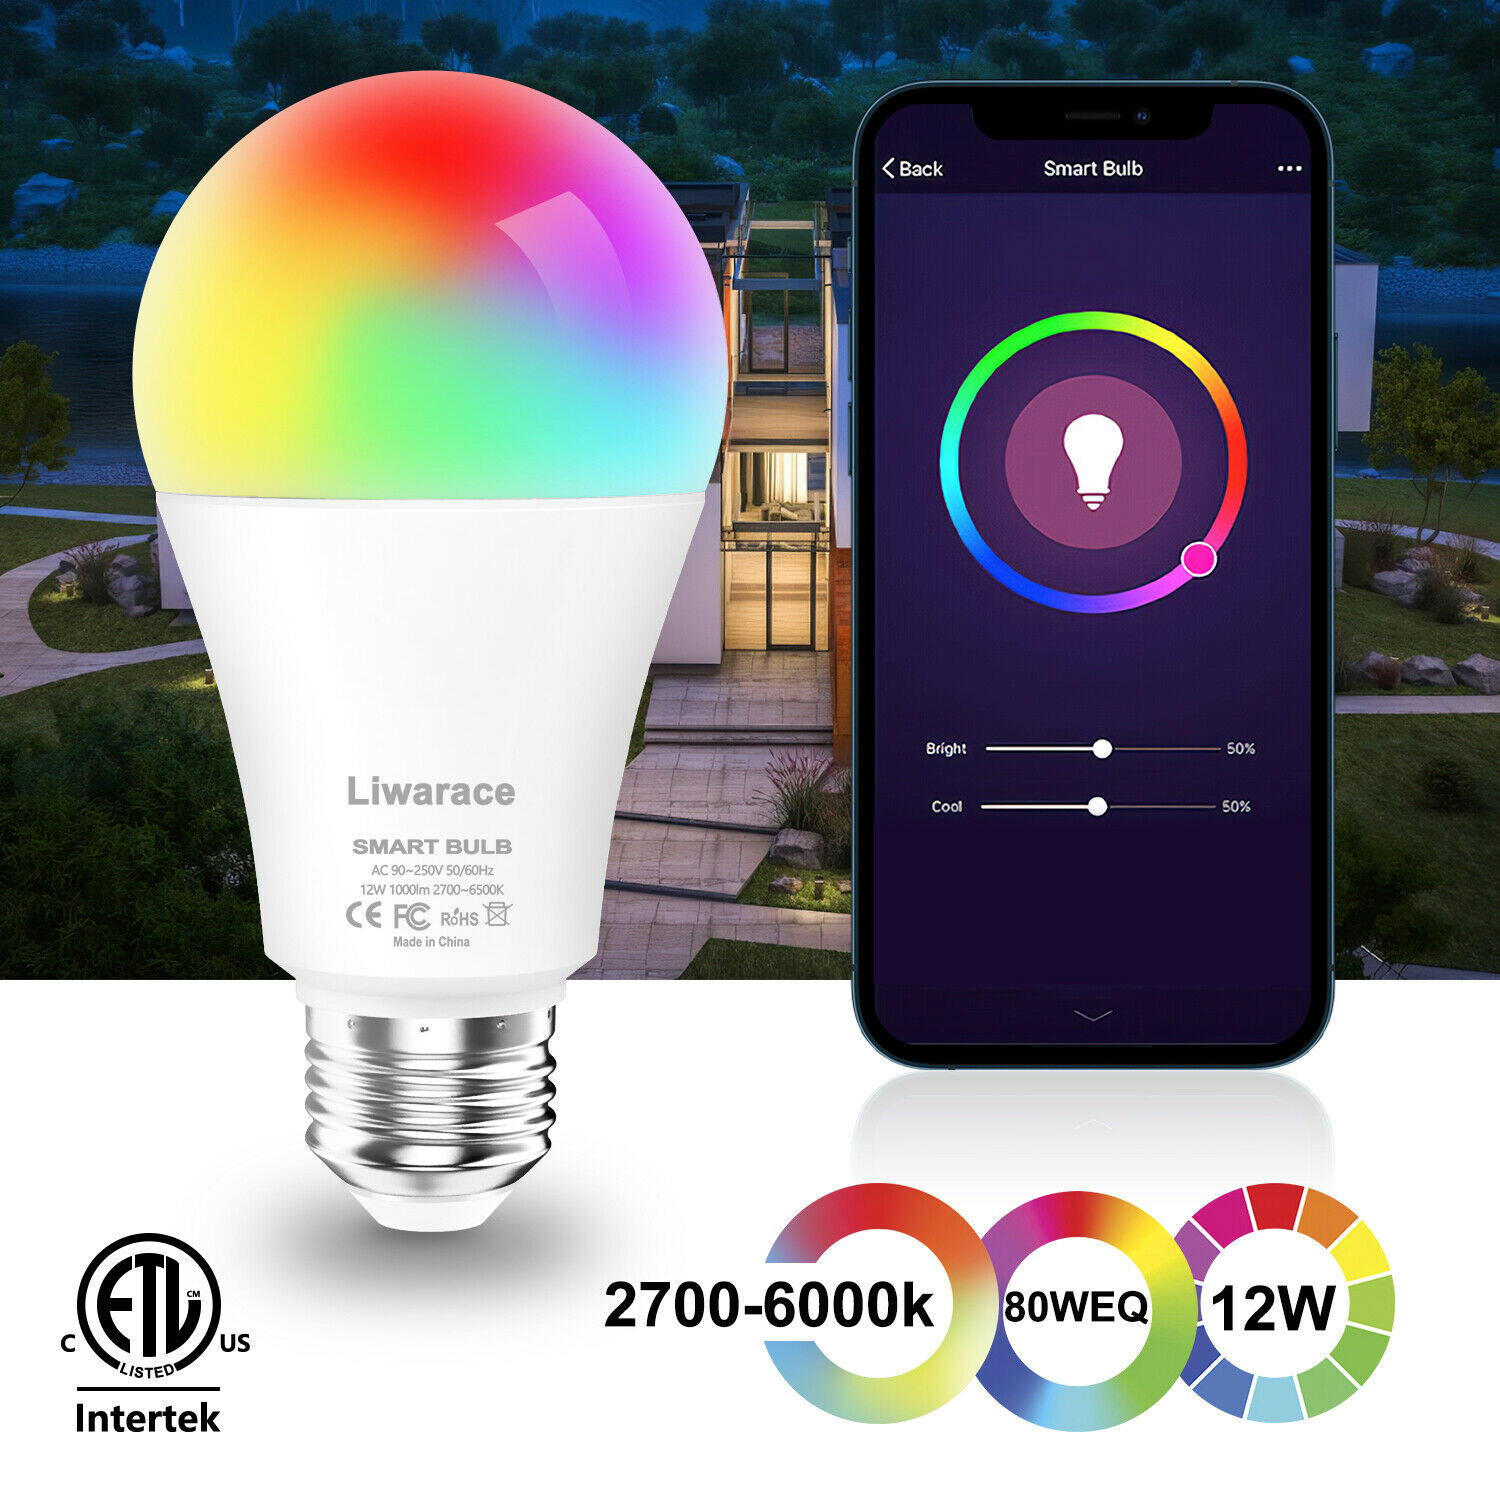 RGBW LED Bulbs Light Bulbs 100W Equivalent 1000lm Color Changing With Remote, 